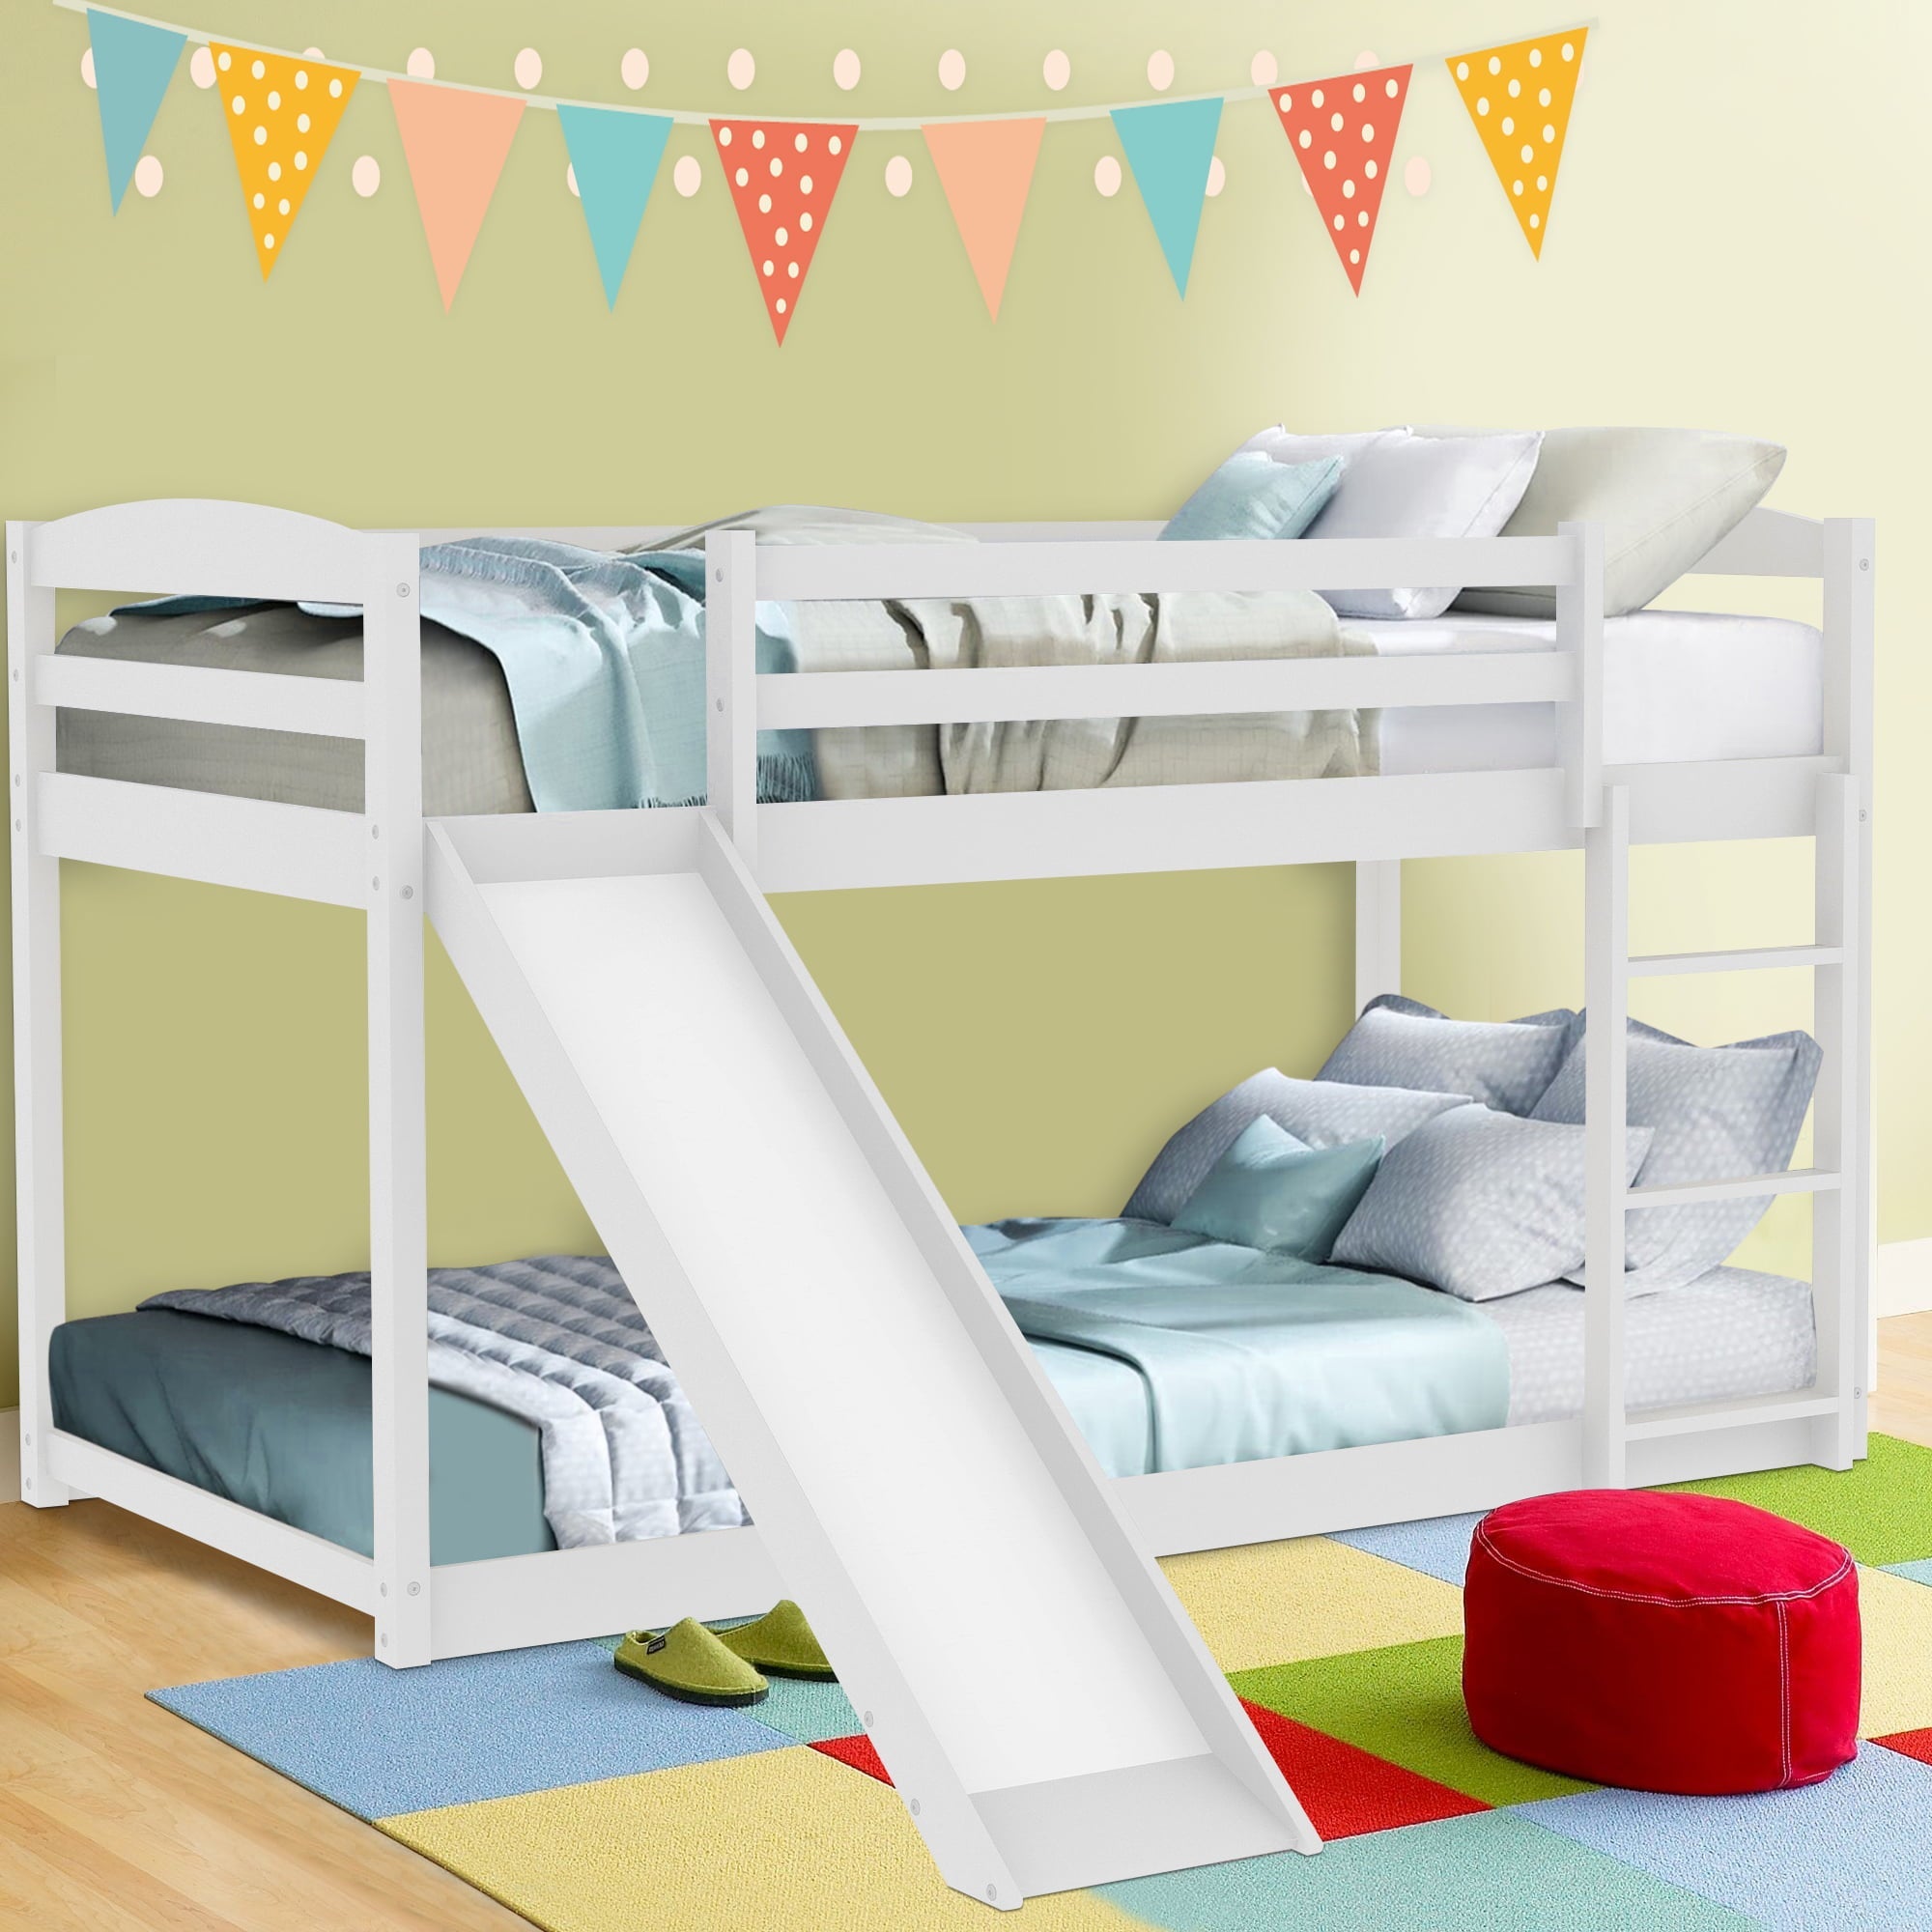 Sesslife Wood Floor Bunk Bed with Convertible Slide and Ladder for Boys Girls Toddlers, White Twin Over Twin Bunk Bed for Home Children’s Room, TE850